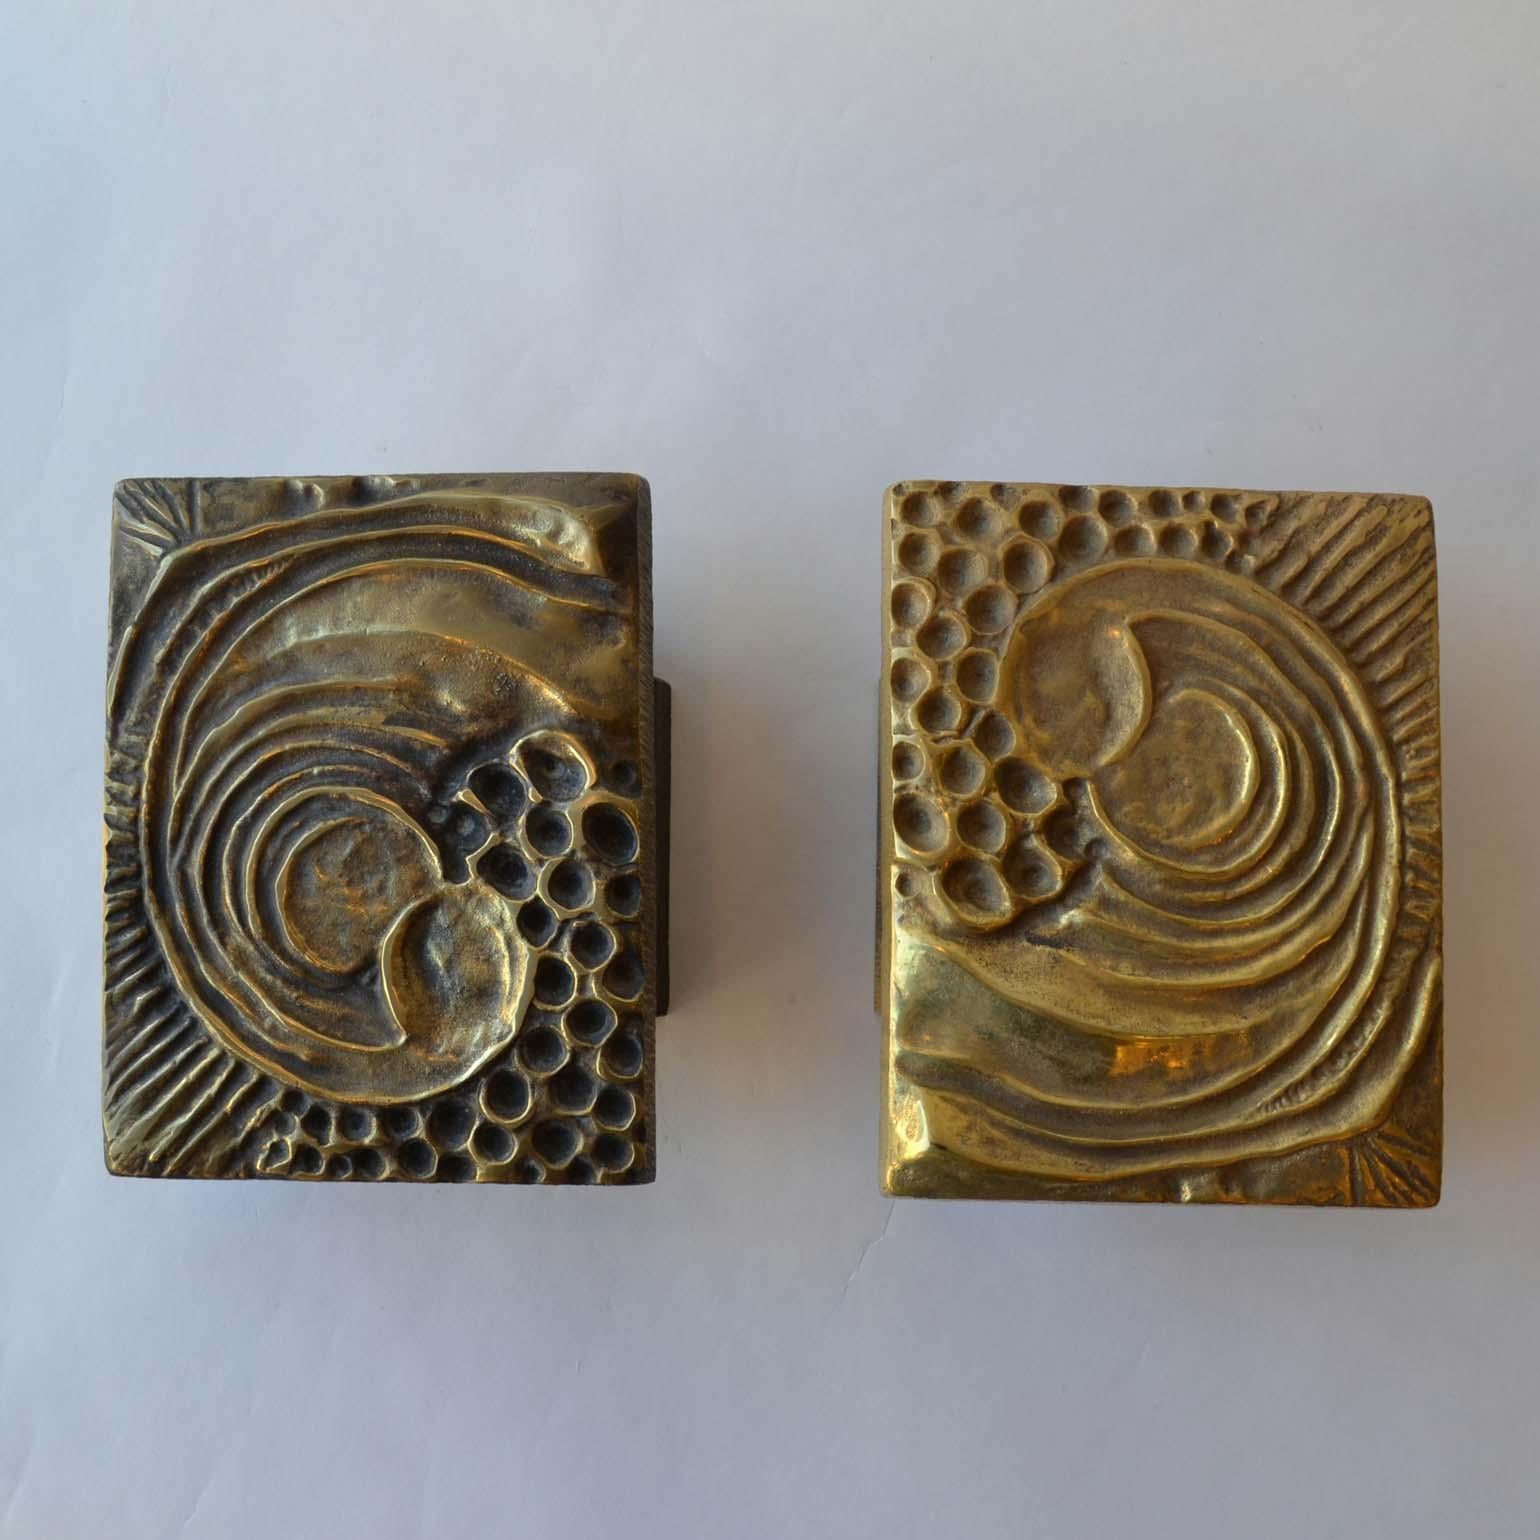 Rectangular pair of push and pull bronze door handles with organic relief for double doors or a single door on both sides.
These door handles were designed in the 1970s for front doors. They are multi purpose and can be used in or outside on doors.